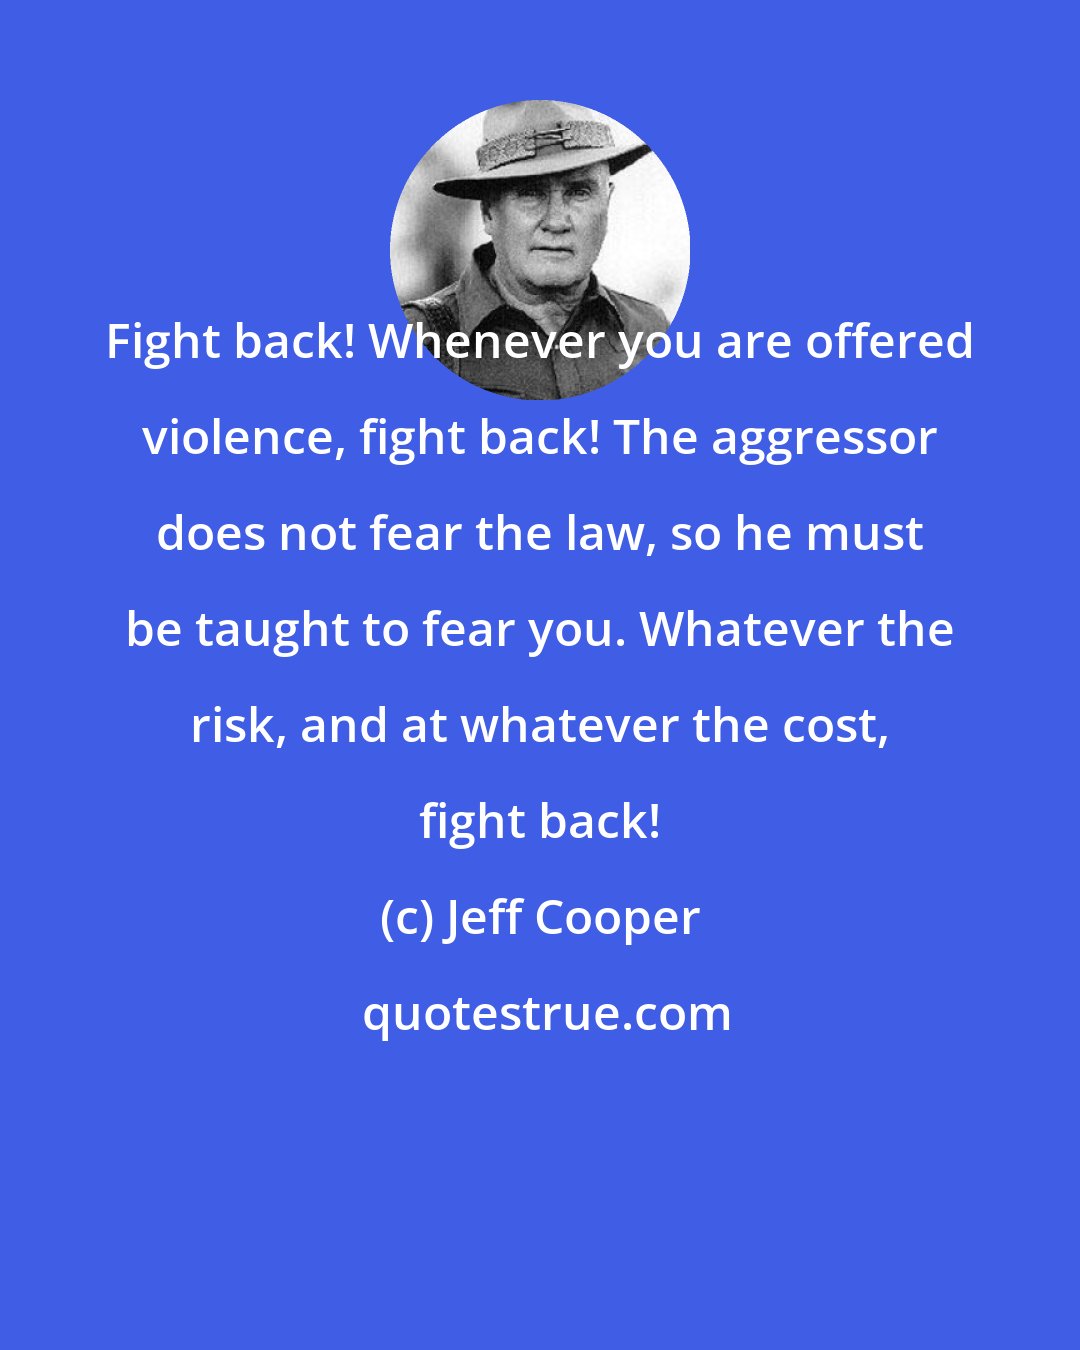 Jeff Cooper: Fight back! Whenever you are offered violence, fight back! The aggressor does not fear the law, so he must be taught to fear you. Whatever the risk, and at whatever the cost, fight back!